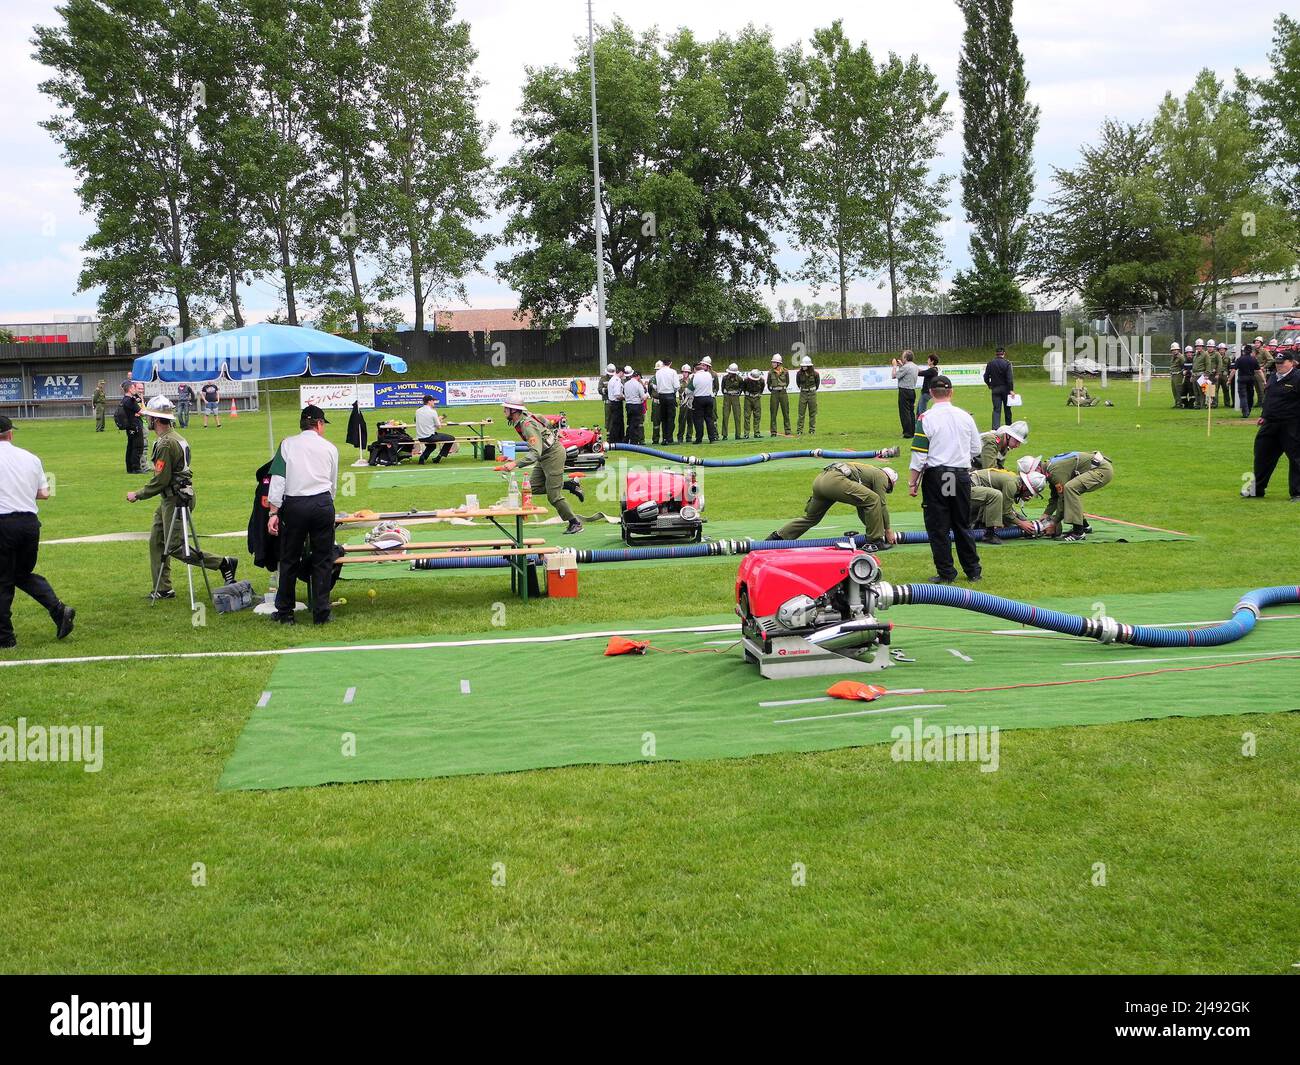 Reisenberg, Austria - June 02, 2012: Unidentifed people by competition for fire brigades on a public sports field Stock Photo